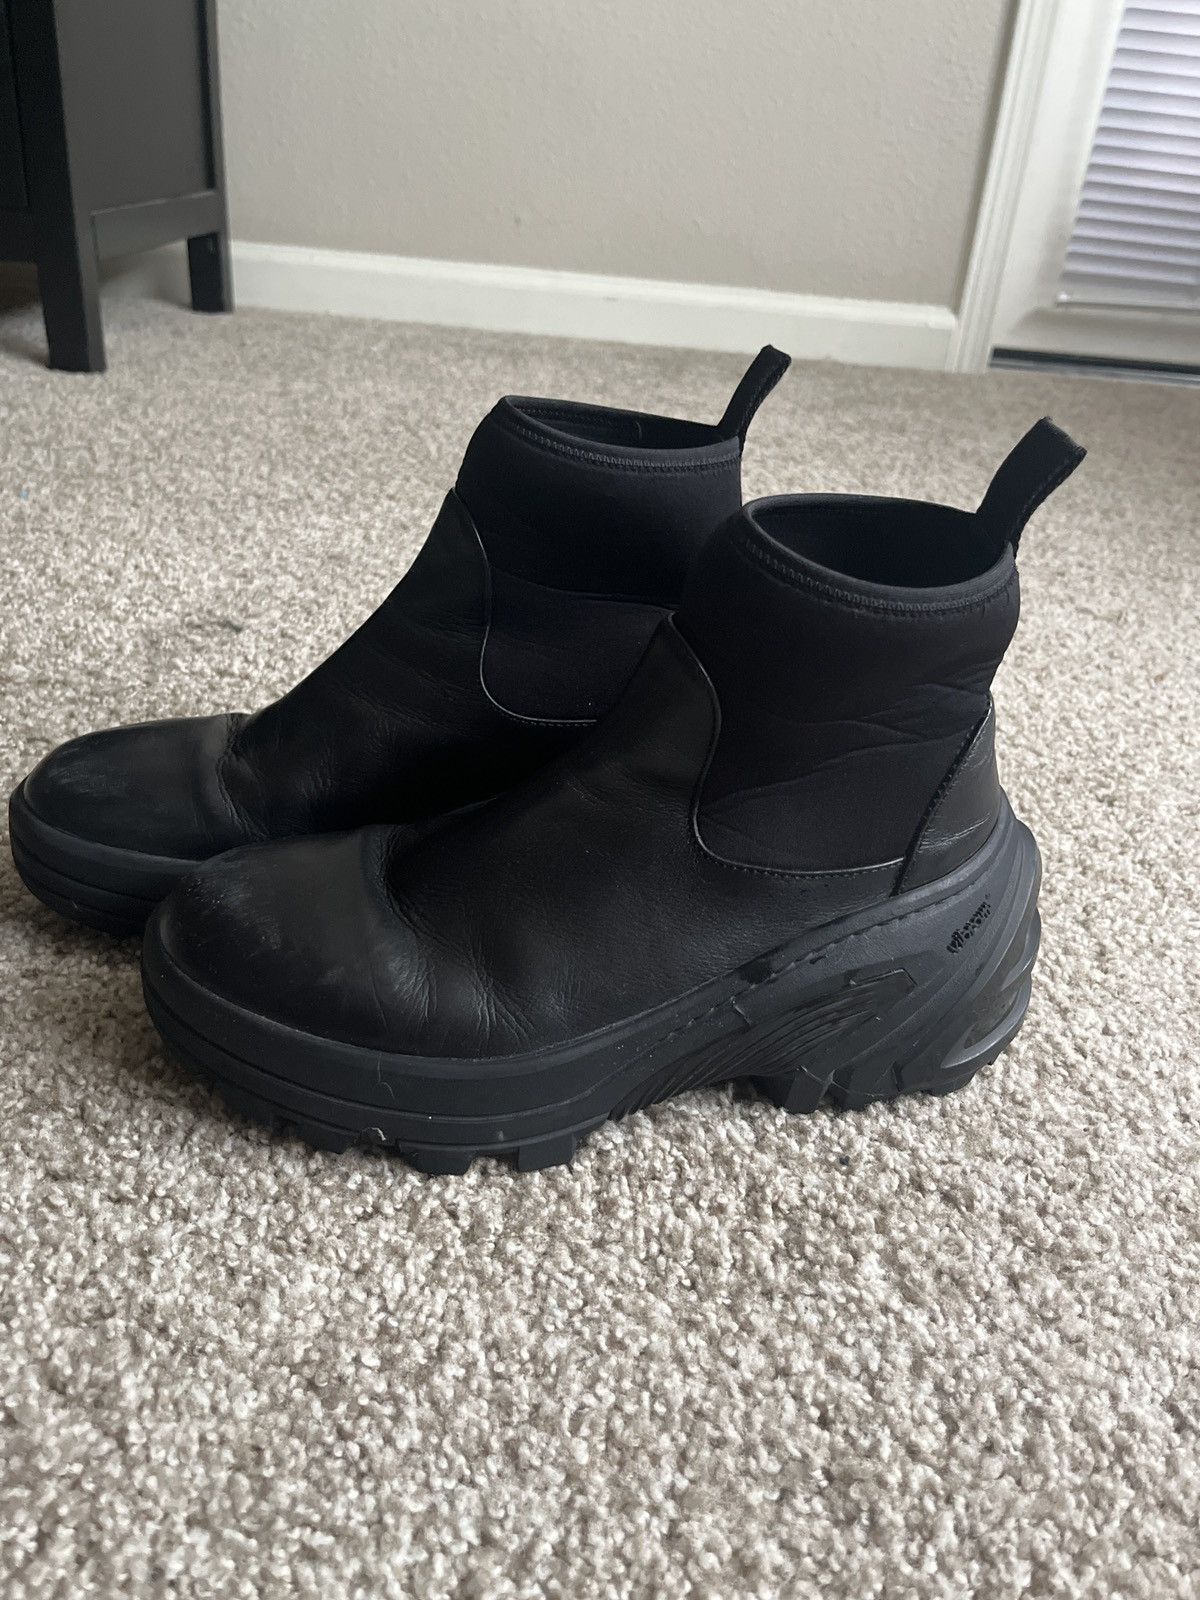 1017 ALYX 9SM Alyx Leather Vibram sole boots | Grailed